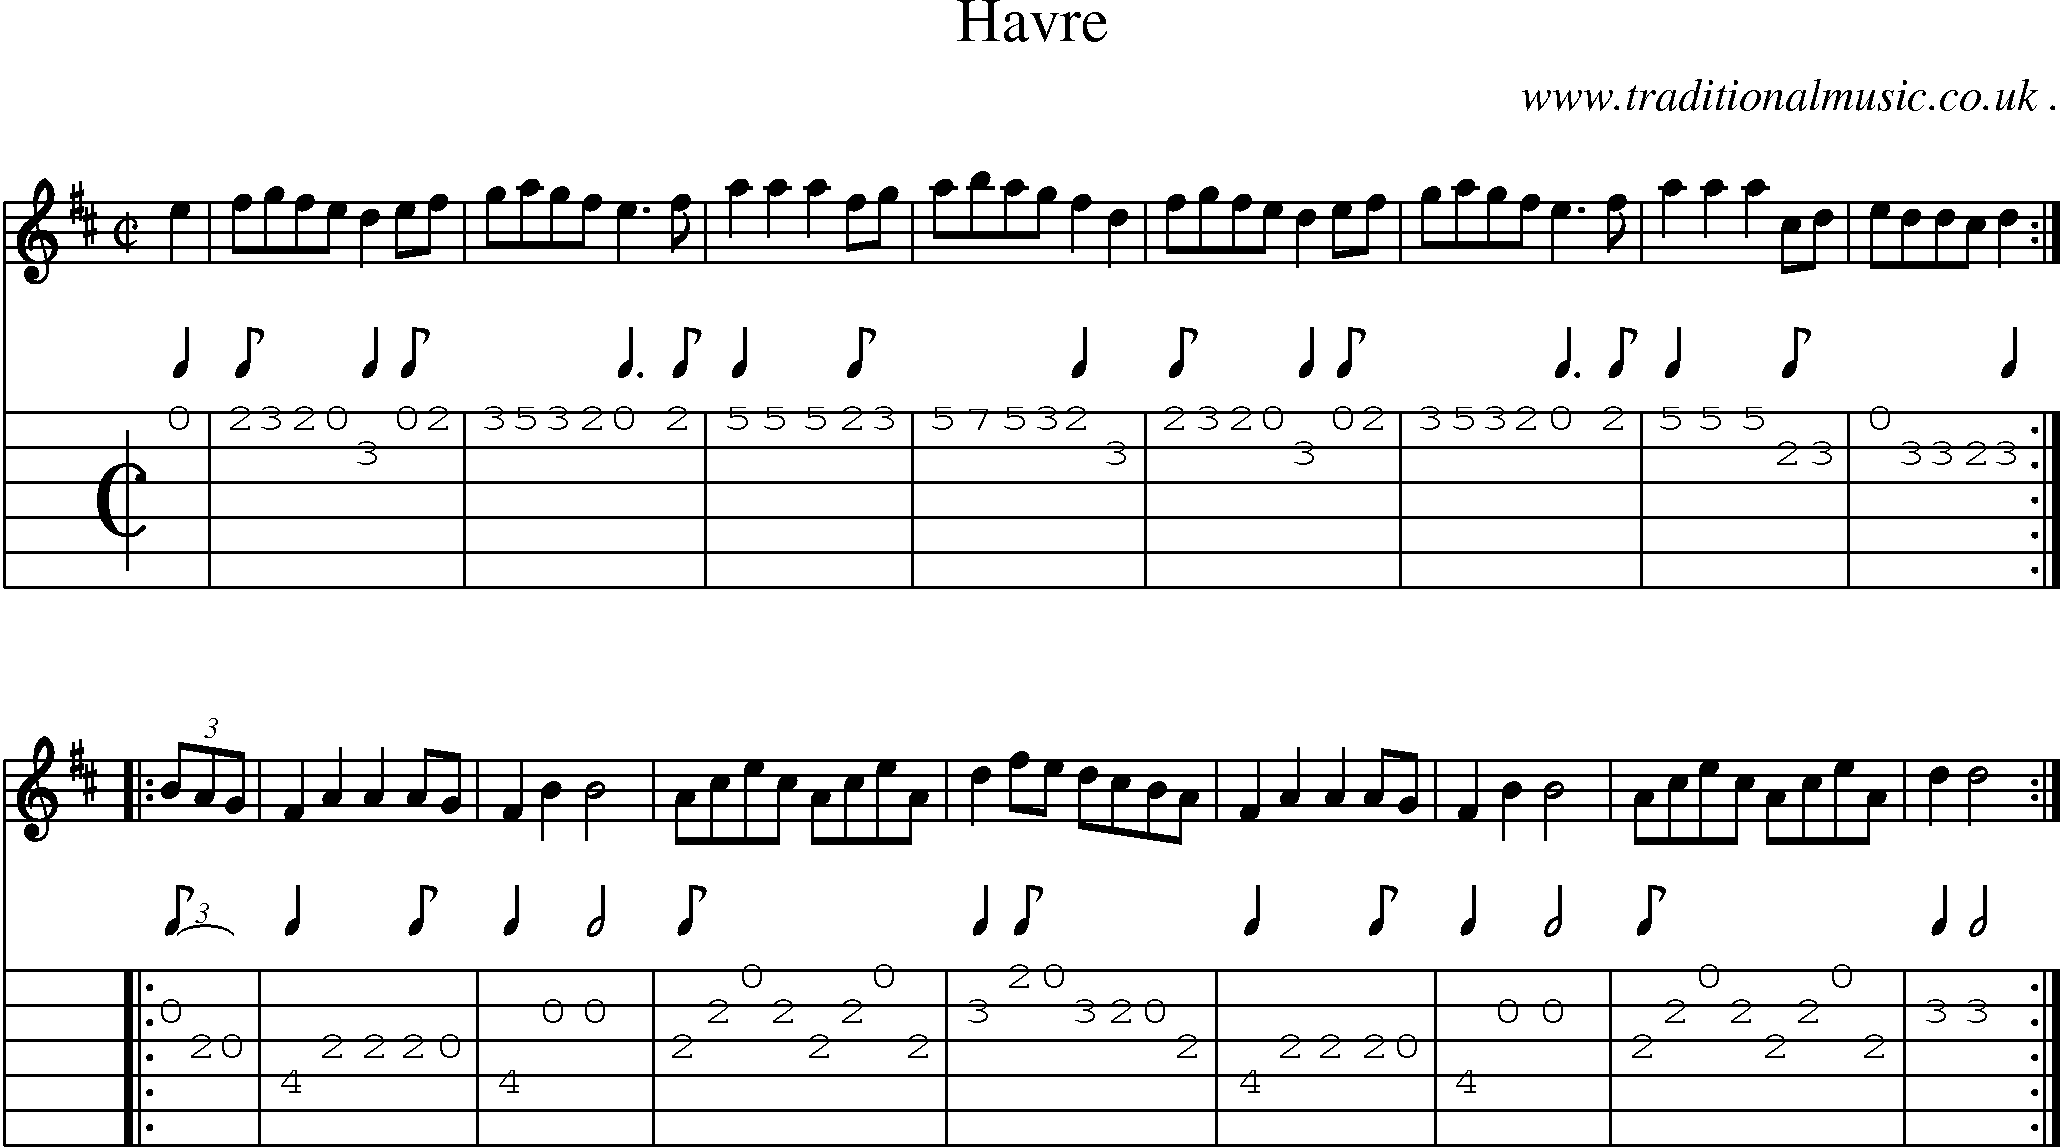 Music Score and Guitar Tabs for Havre